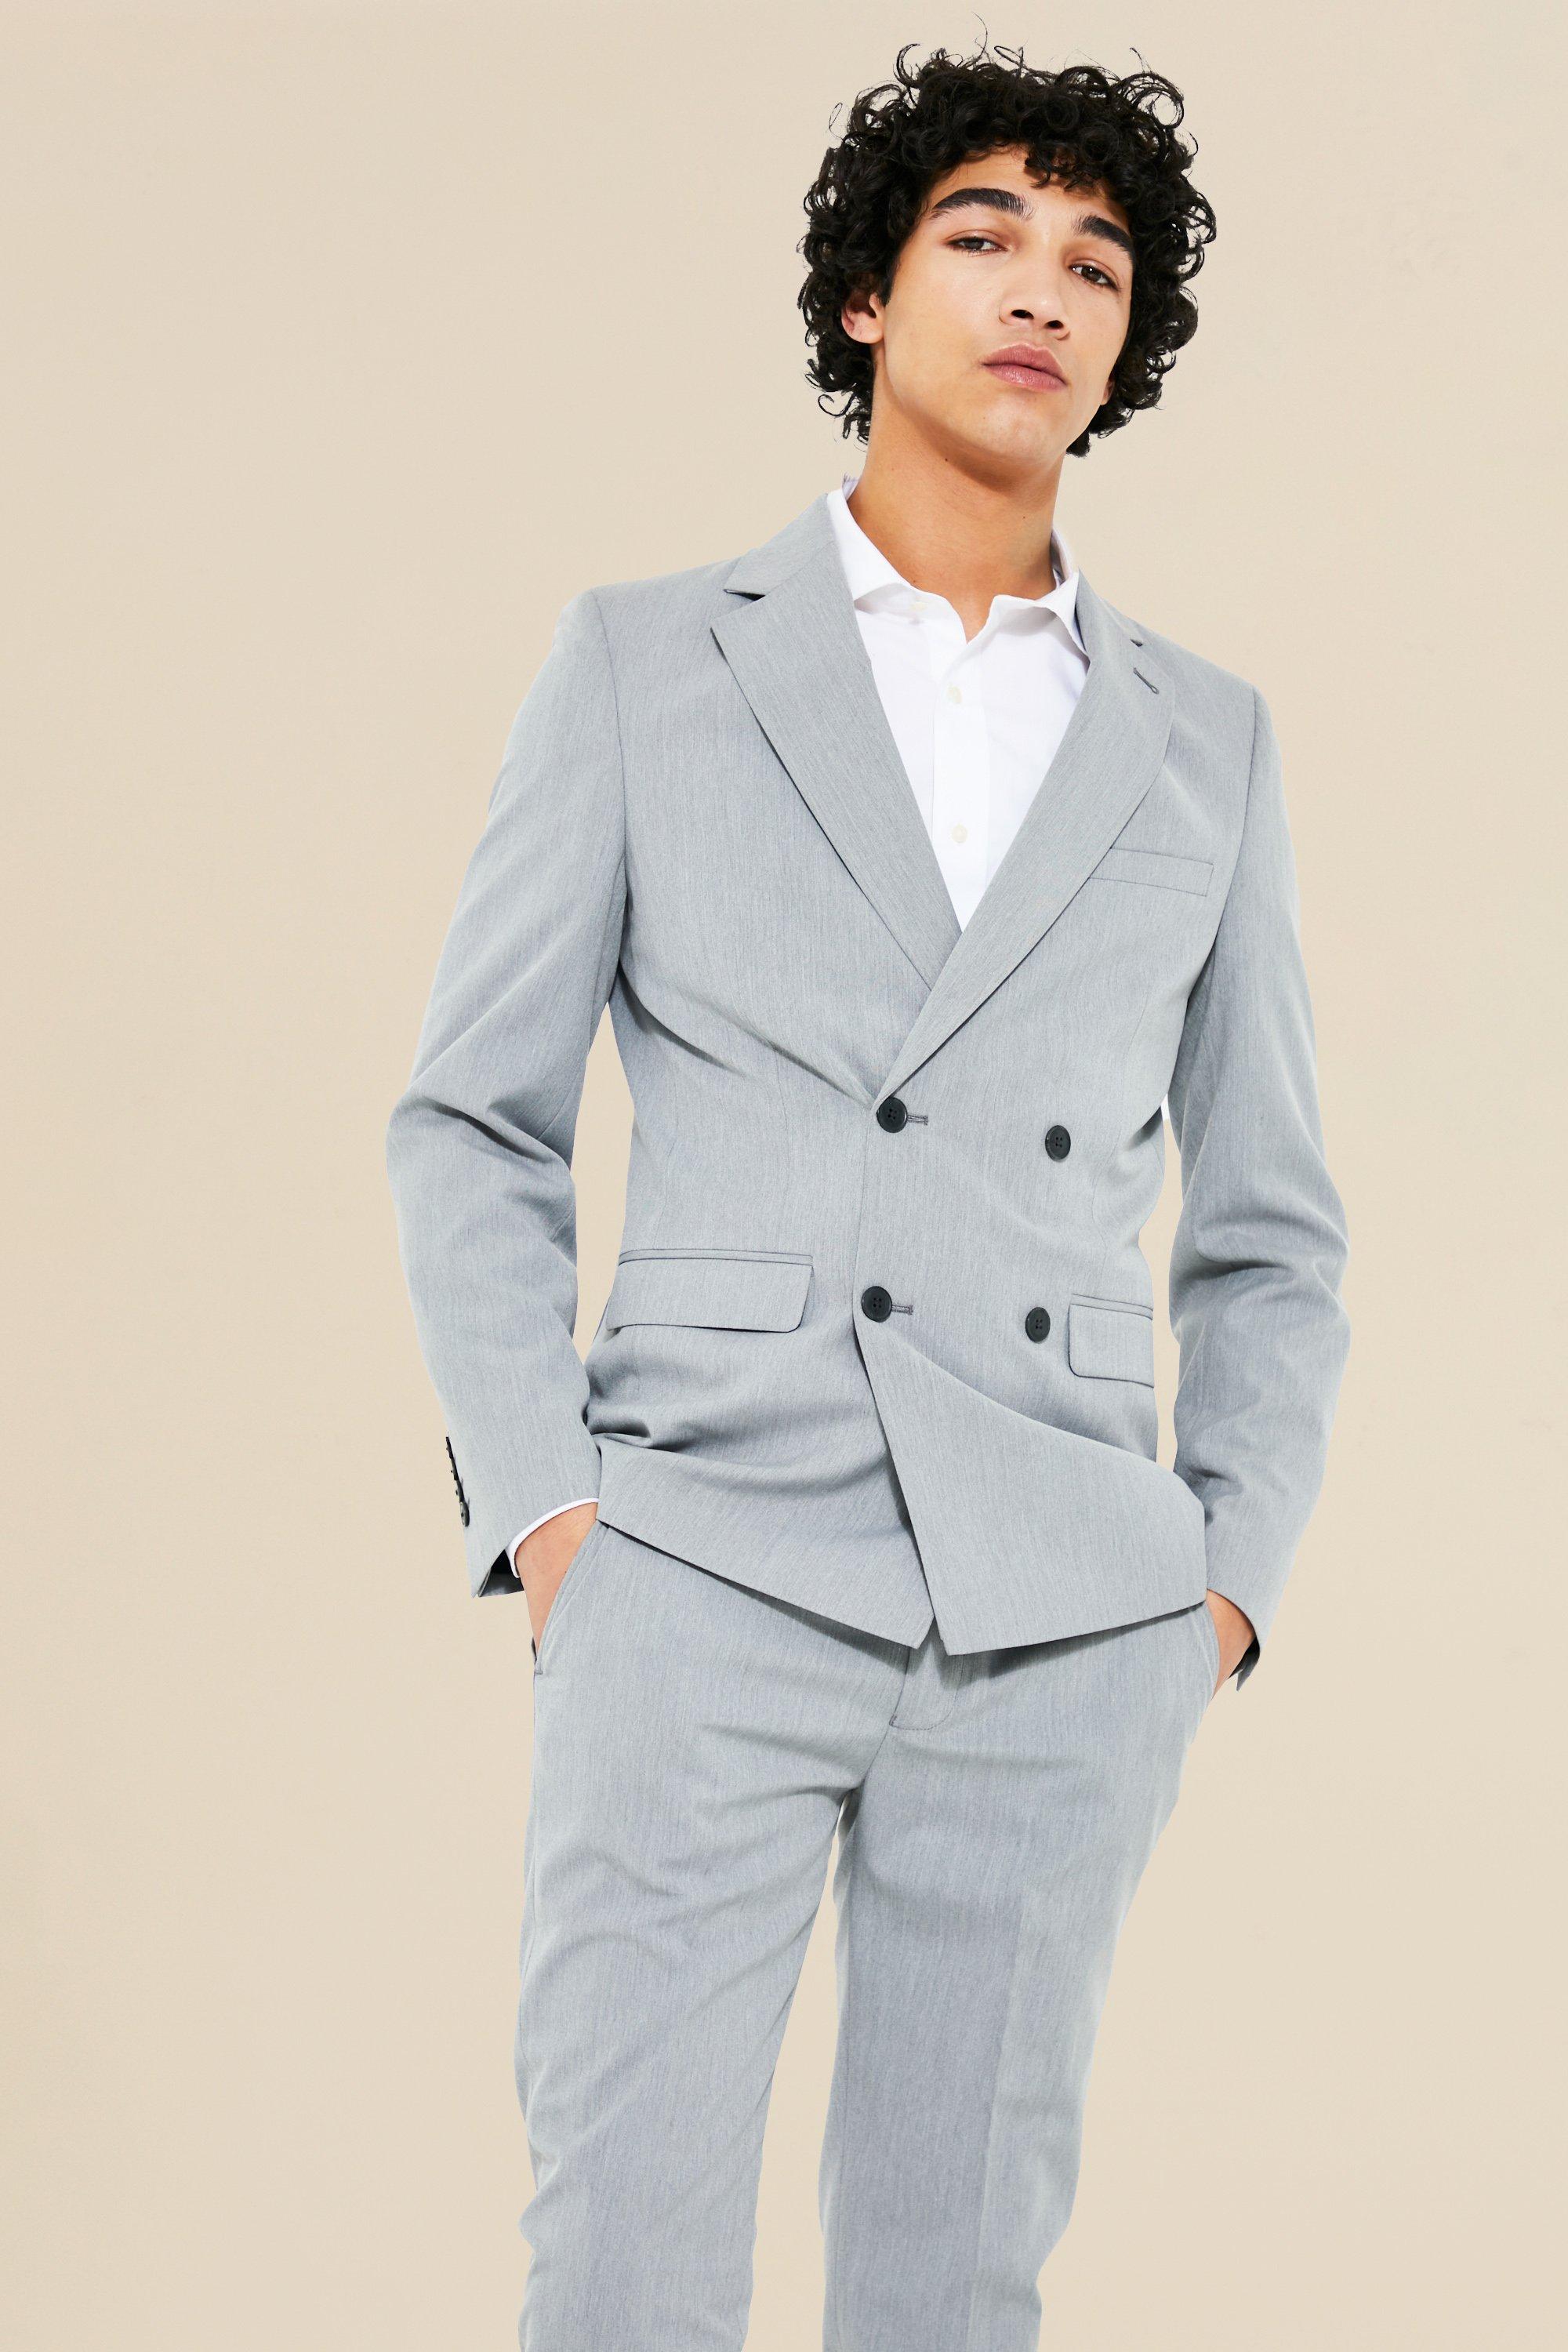 Men's Skinny Double Breasted Suit Jacket - Grey - 34, Grey